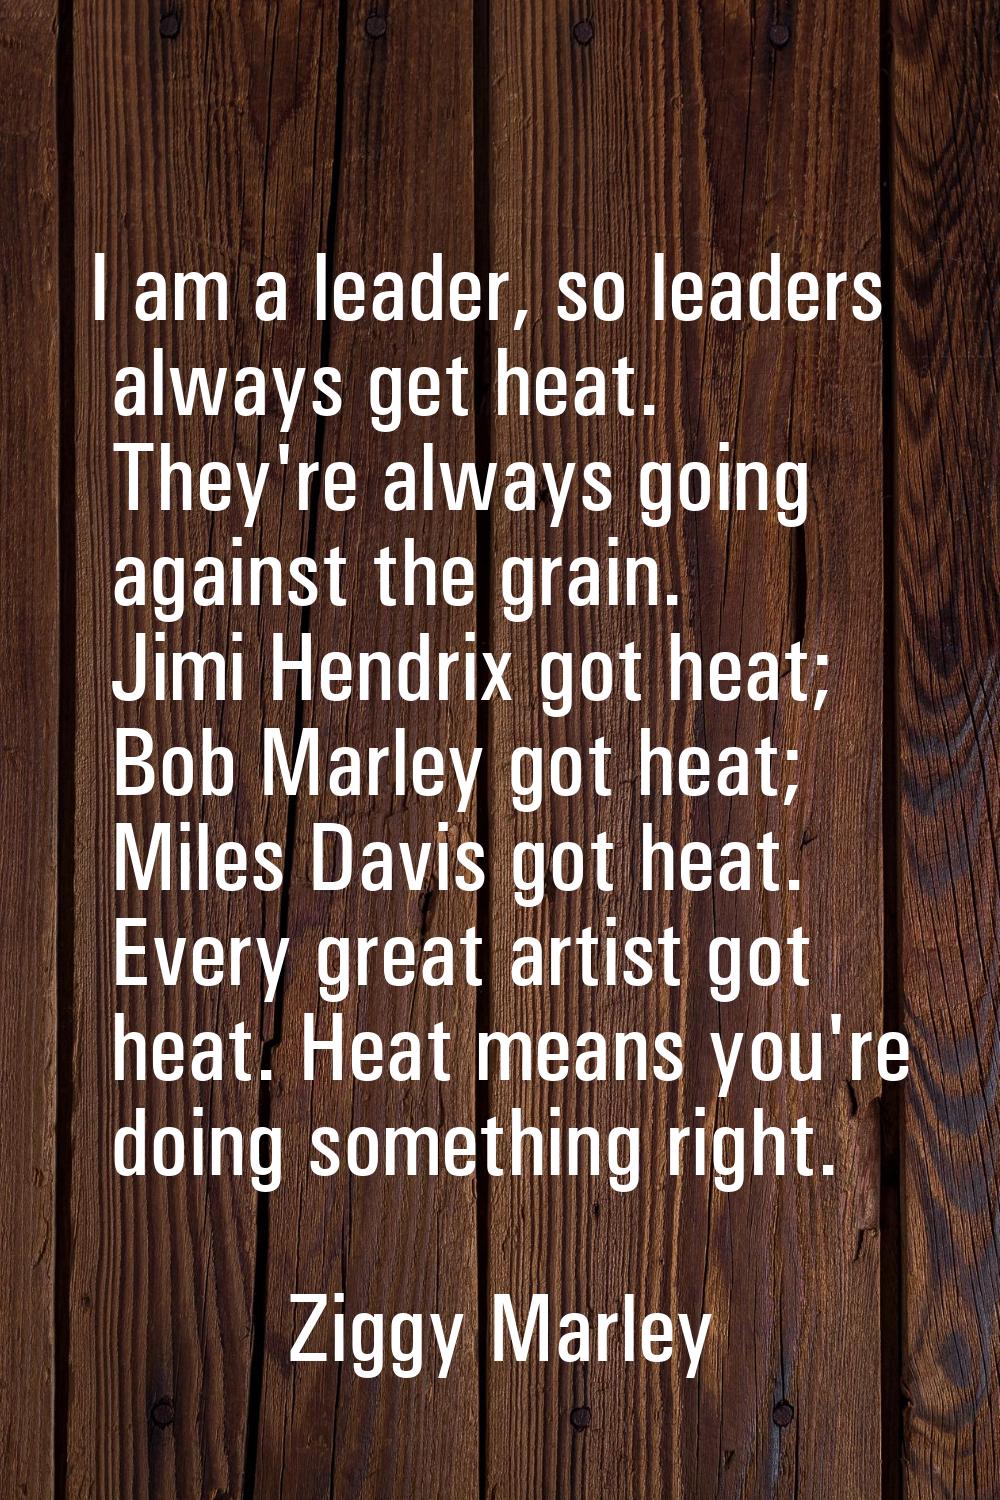 I am a leader, so leaders always get heat. They're always going against the grain. Jimi Hendrix got